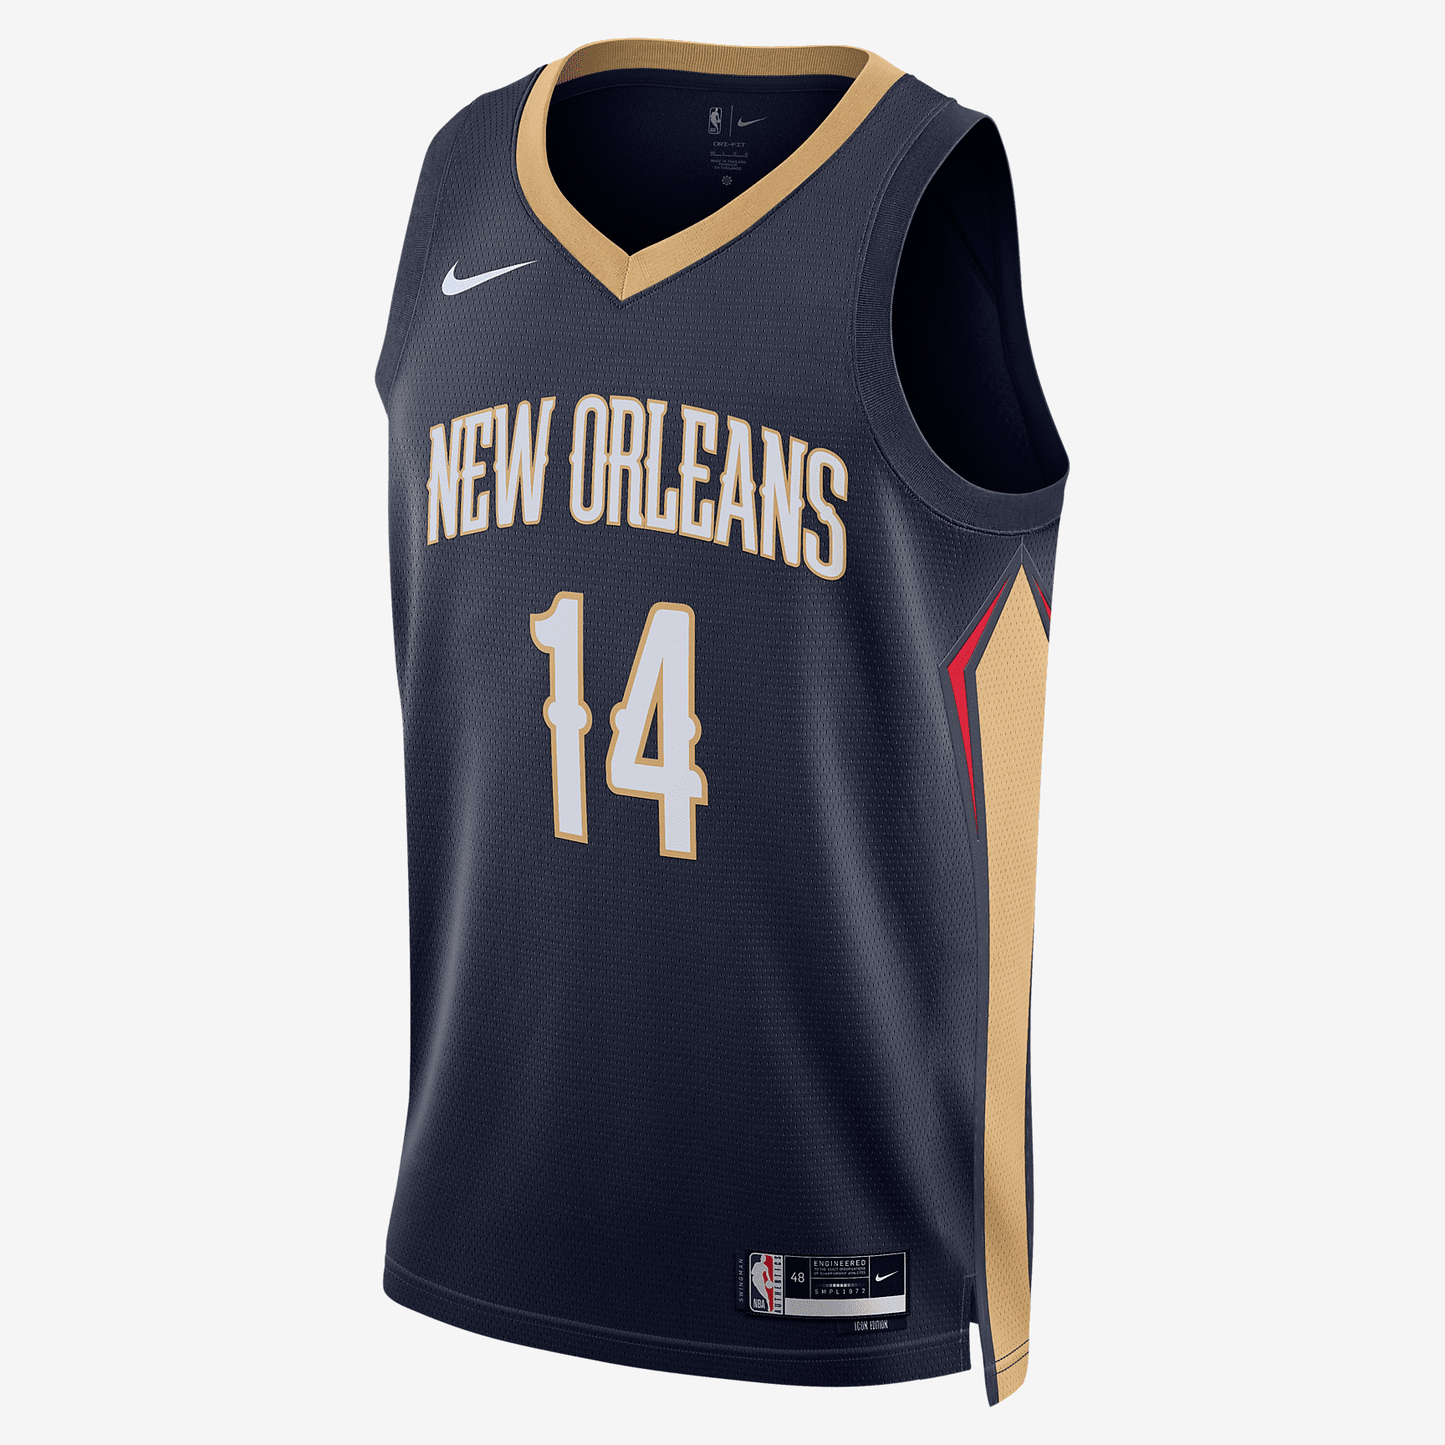 New Orleans Pelicans Icon Edition 2022/23 Nike Dri-FIT NBA Swingman Jersey - College Navy